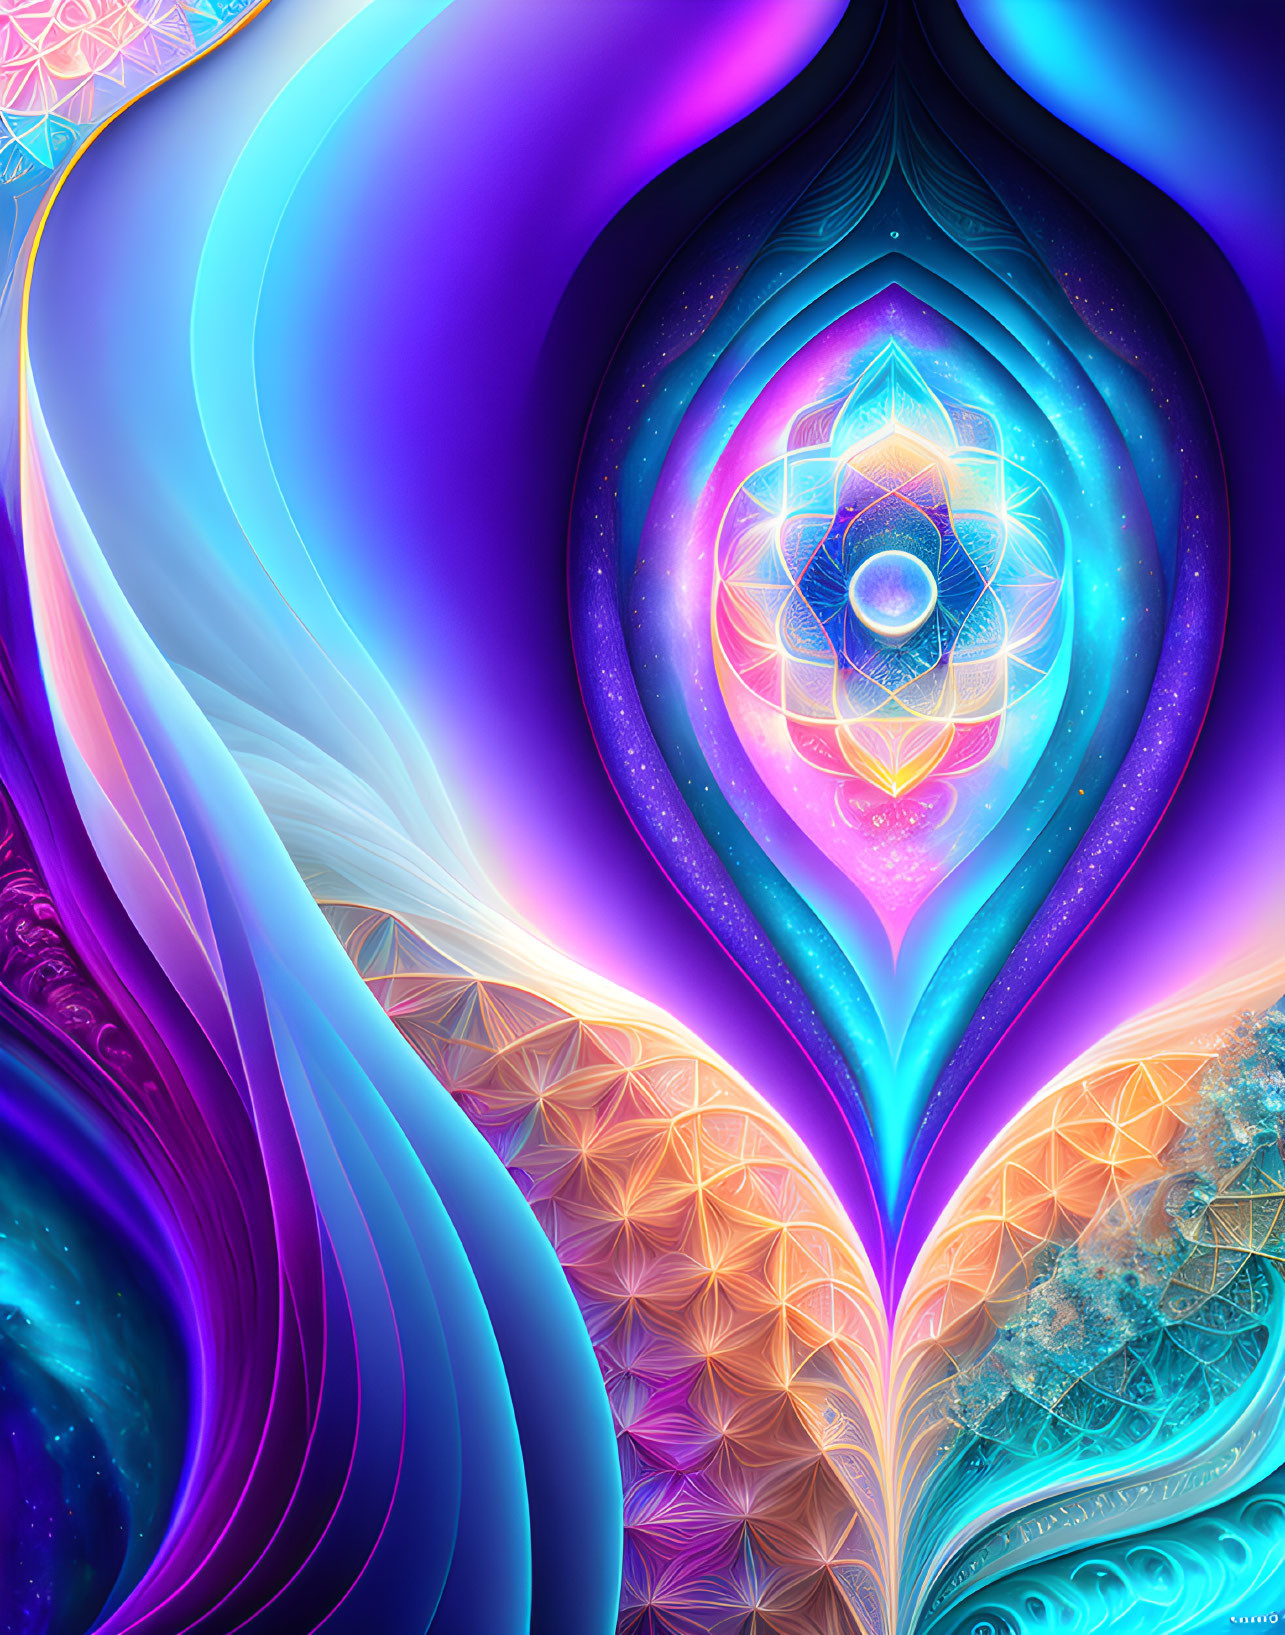 Abstract digital artwork: Vibrant blue and purple shapes with intricate geometric patterns and glowing mandala center